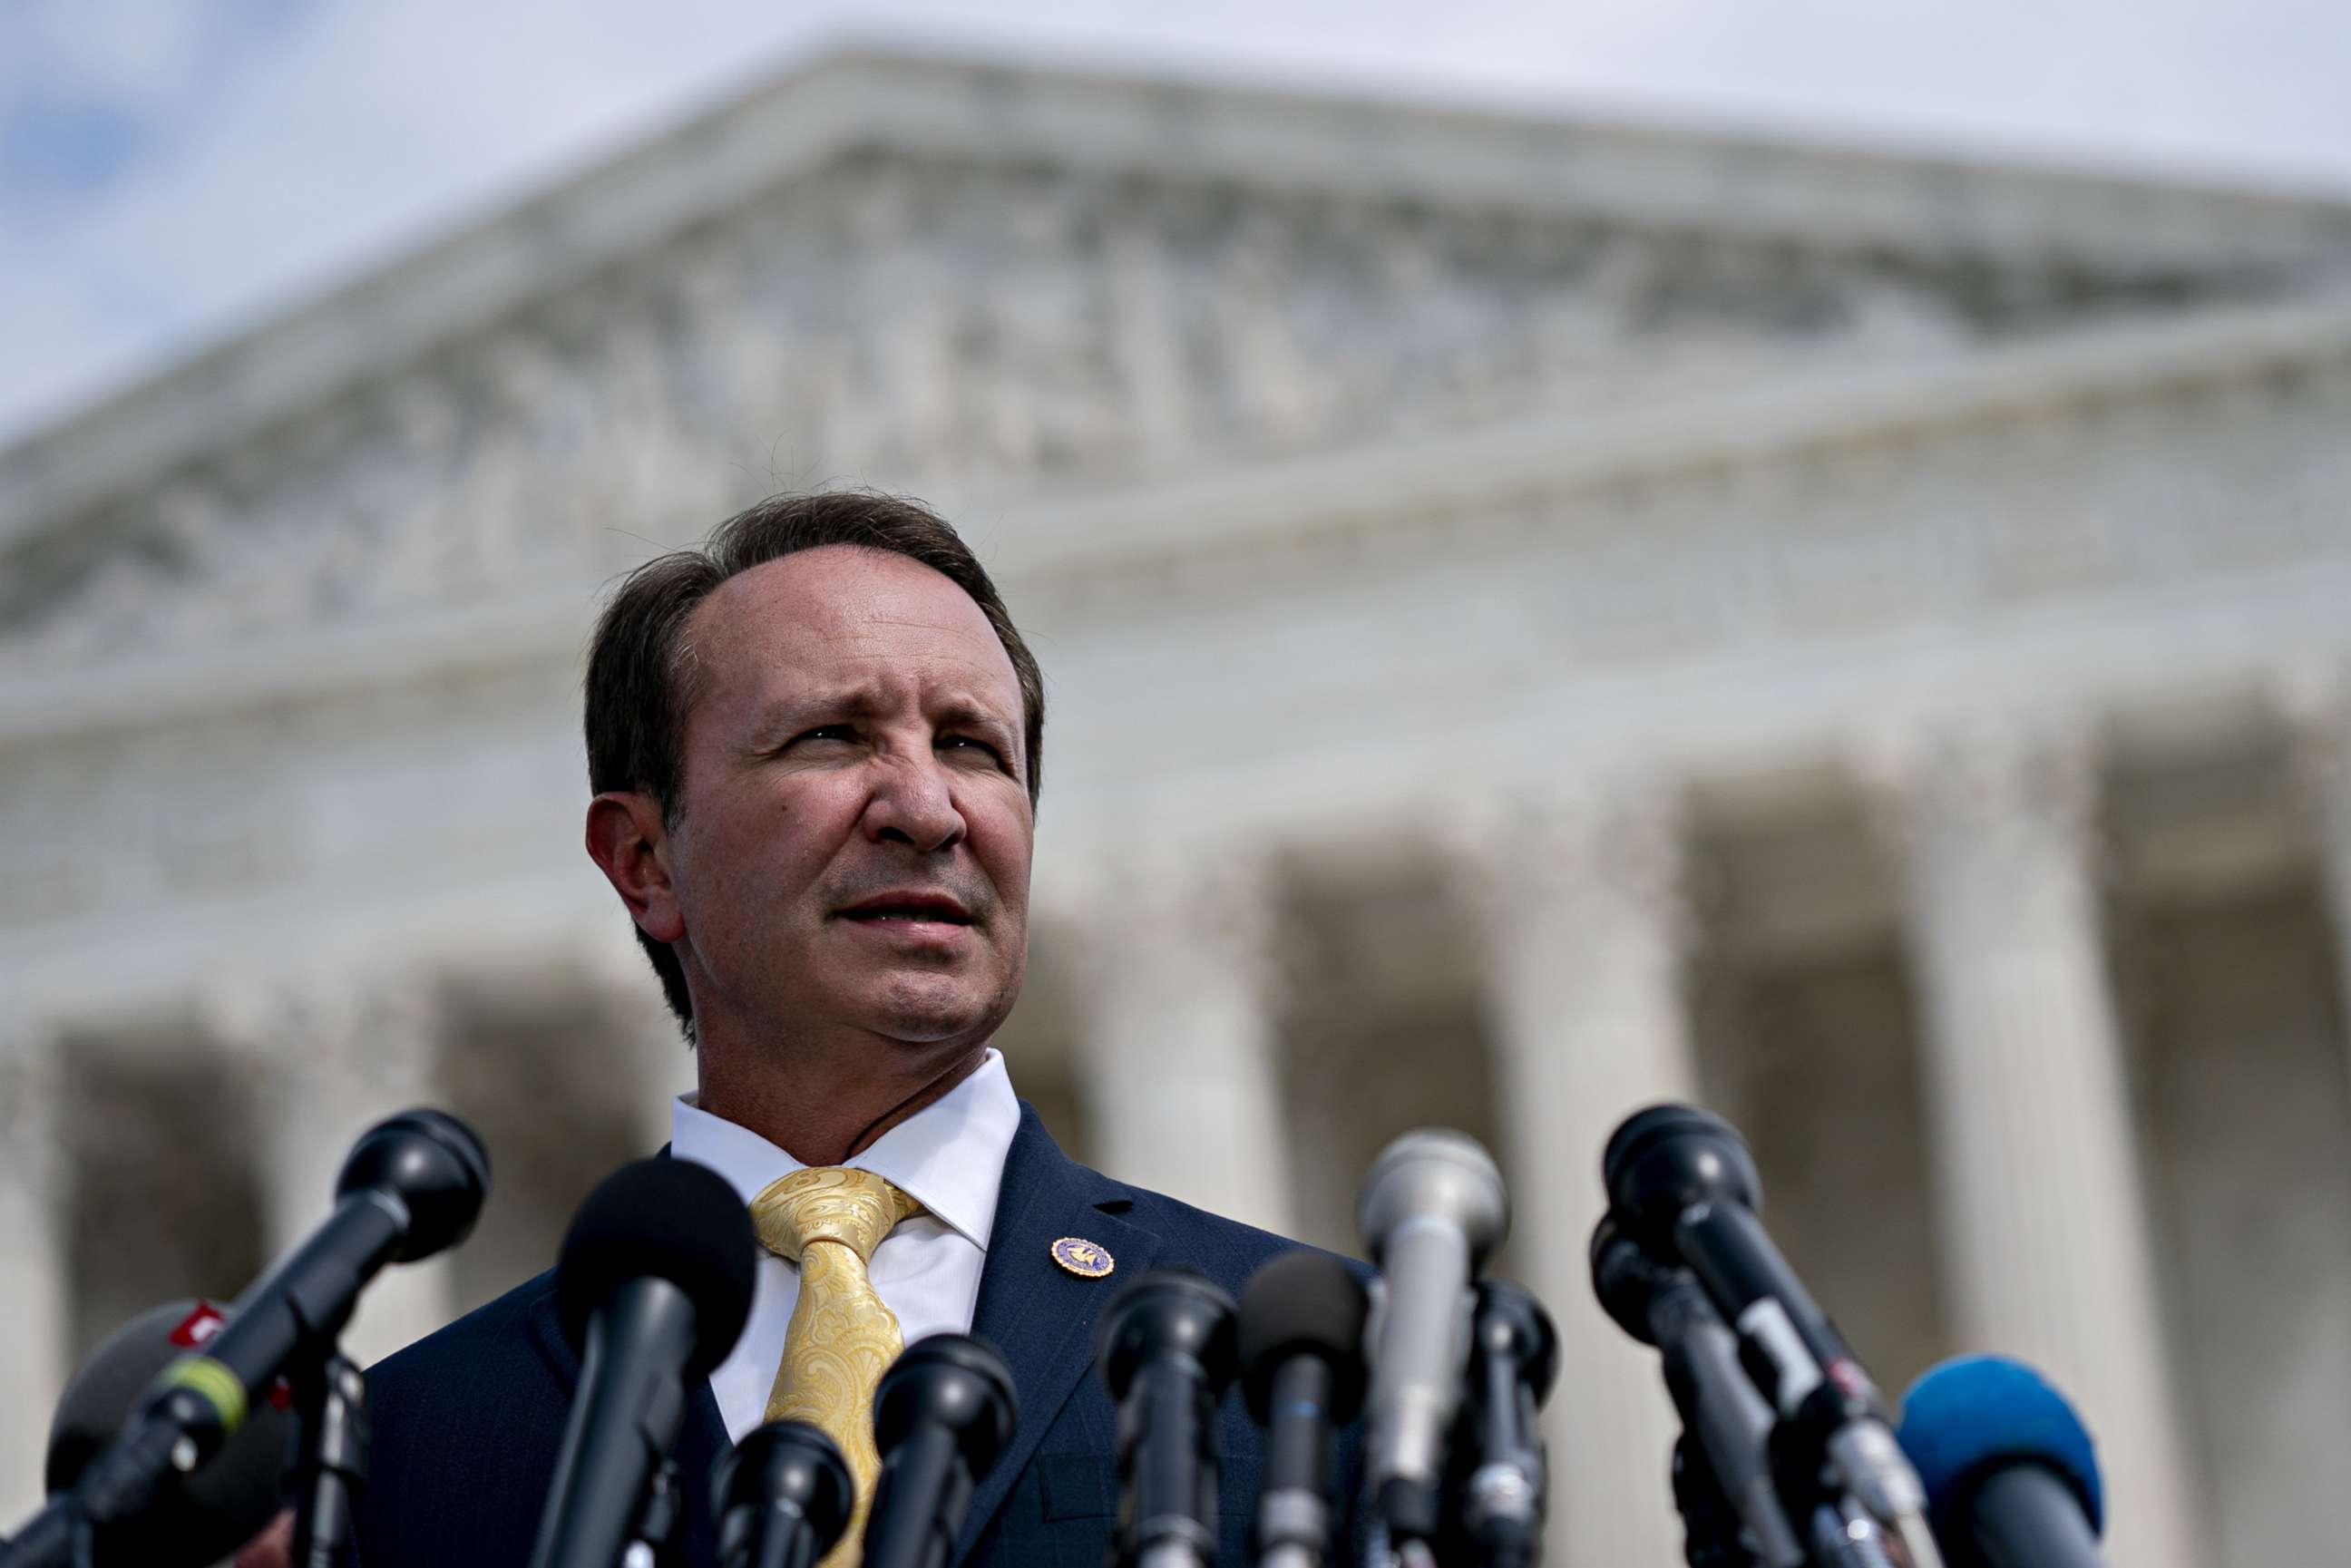 PHOTO: Jeff Landry, Louisiana attorney general, speaks during a news conference outside the U.S. Supreme Court in Washington, DC, Sept. 9, 2019.